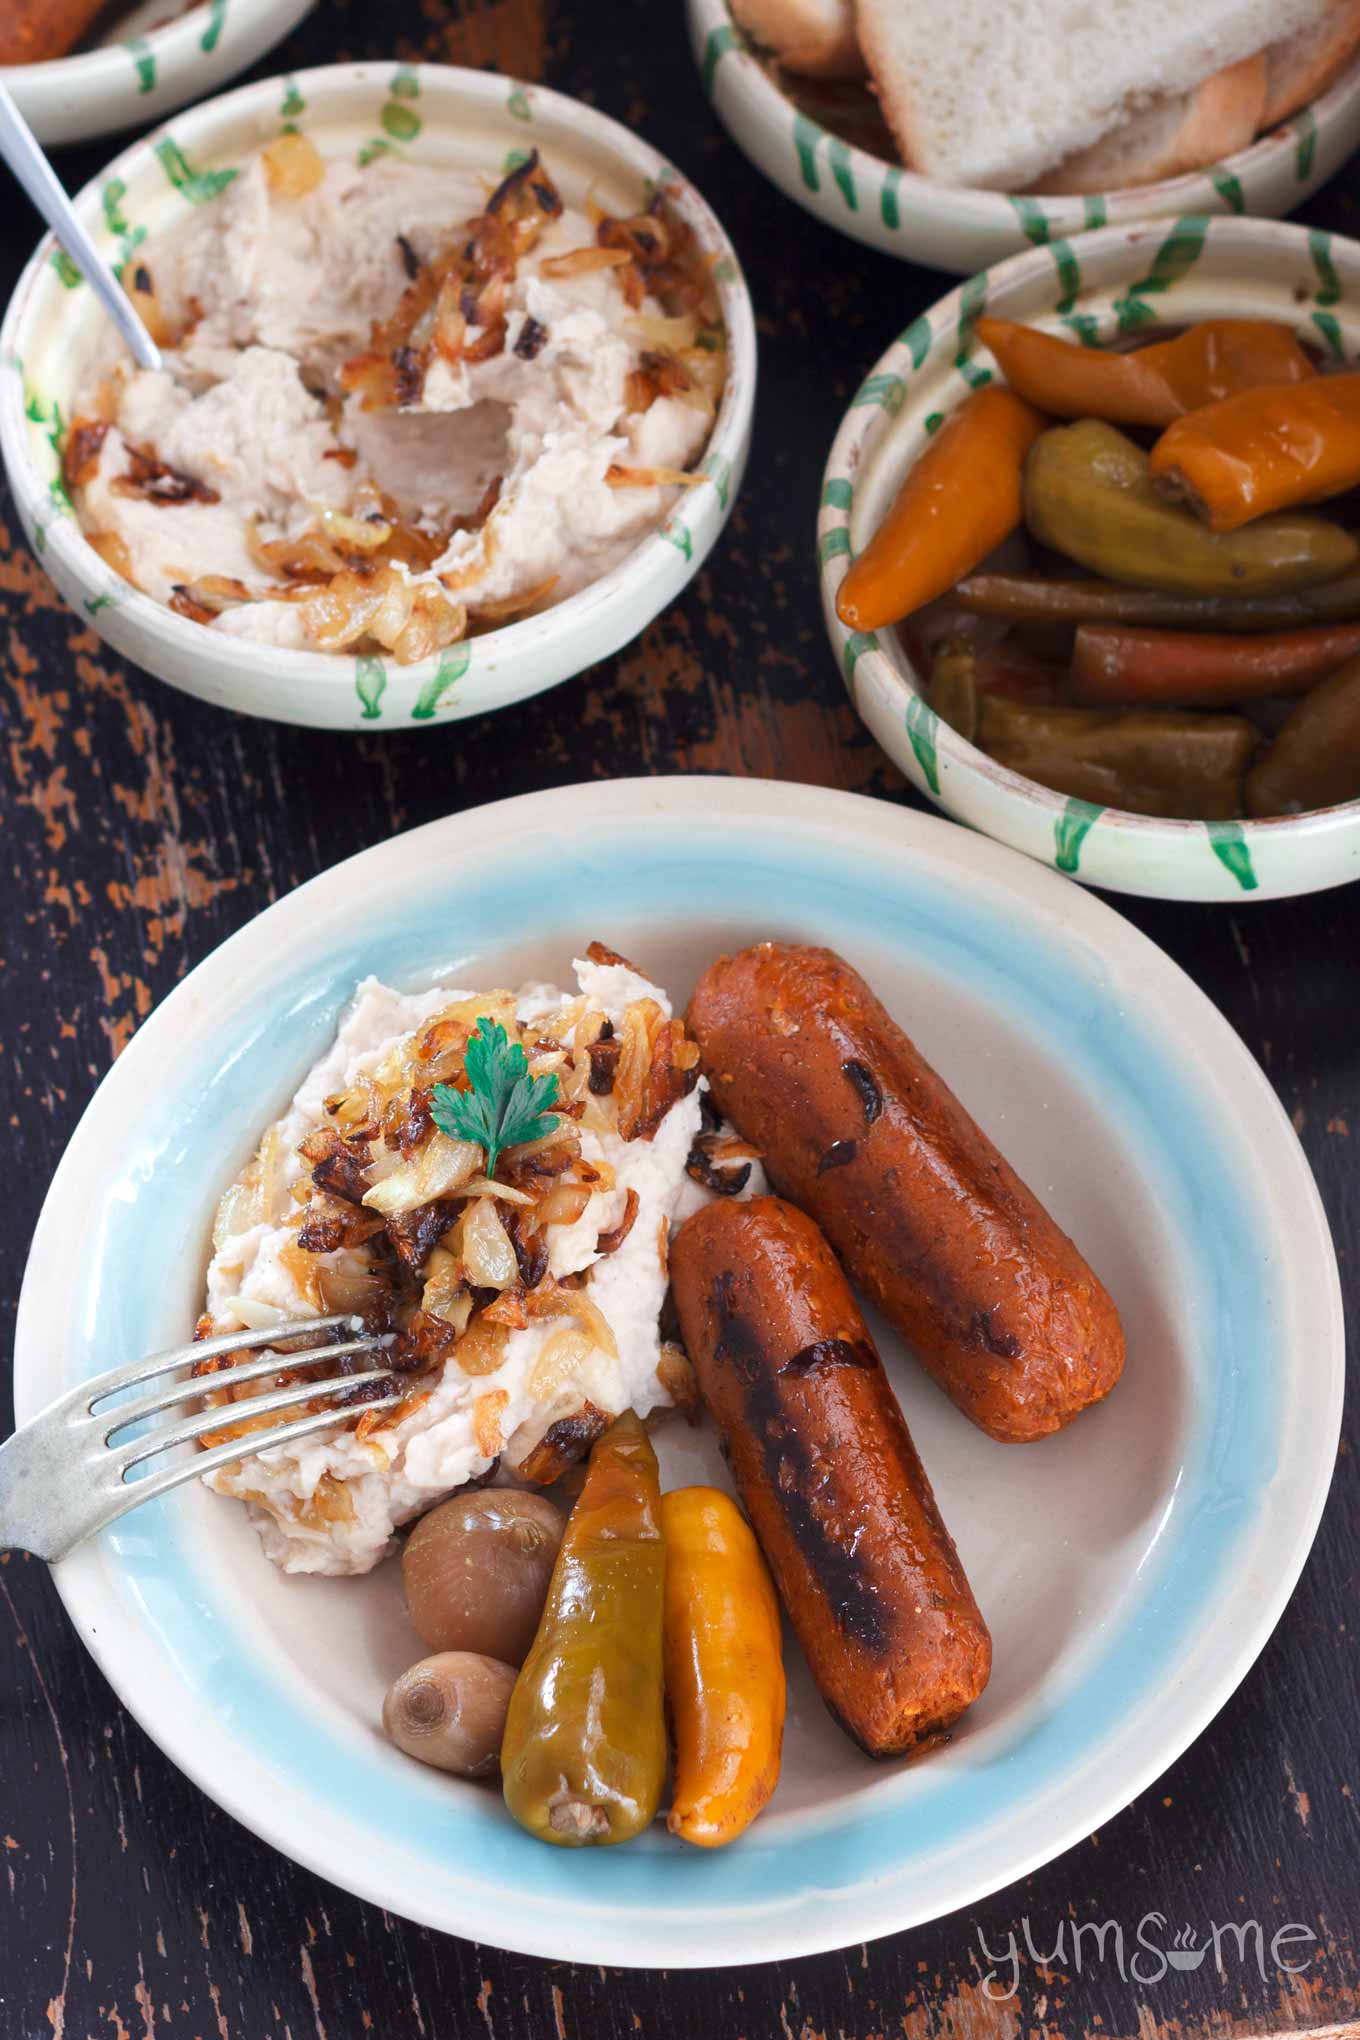 Closeup overhead shot of a blue and white dish of fasole with caramelised onions, sausages, and pickles. Dishes of fasole and pickles are in the background.